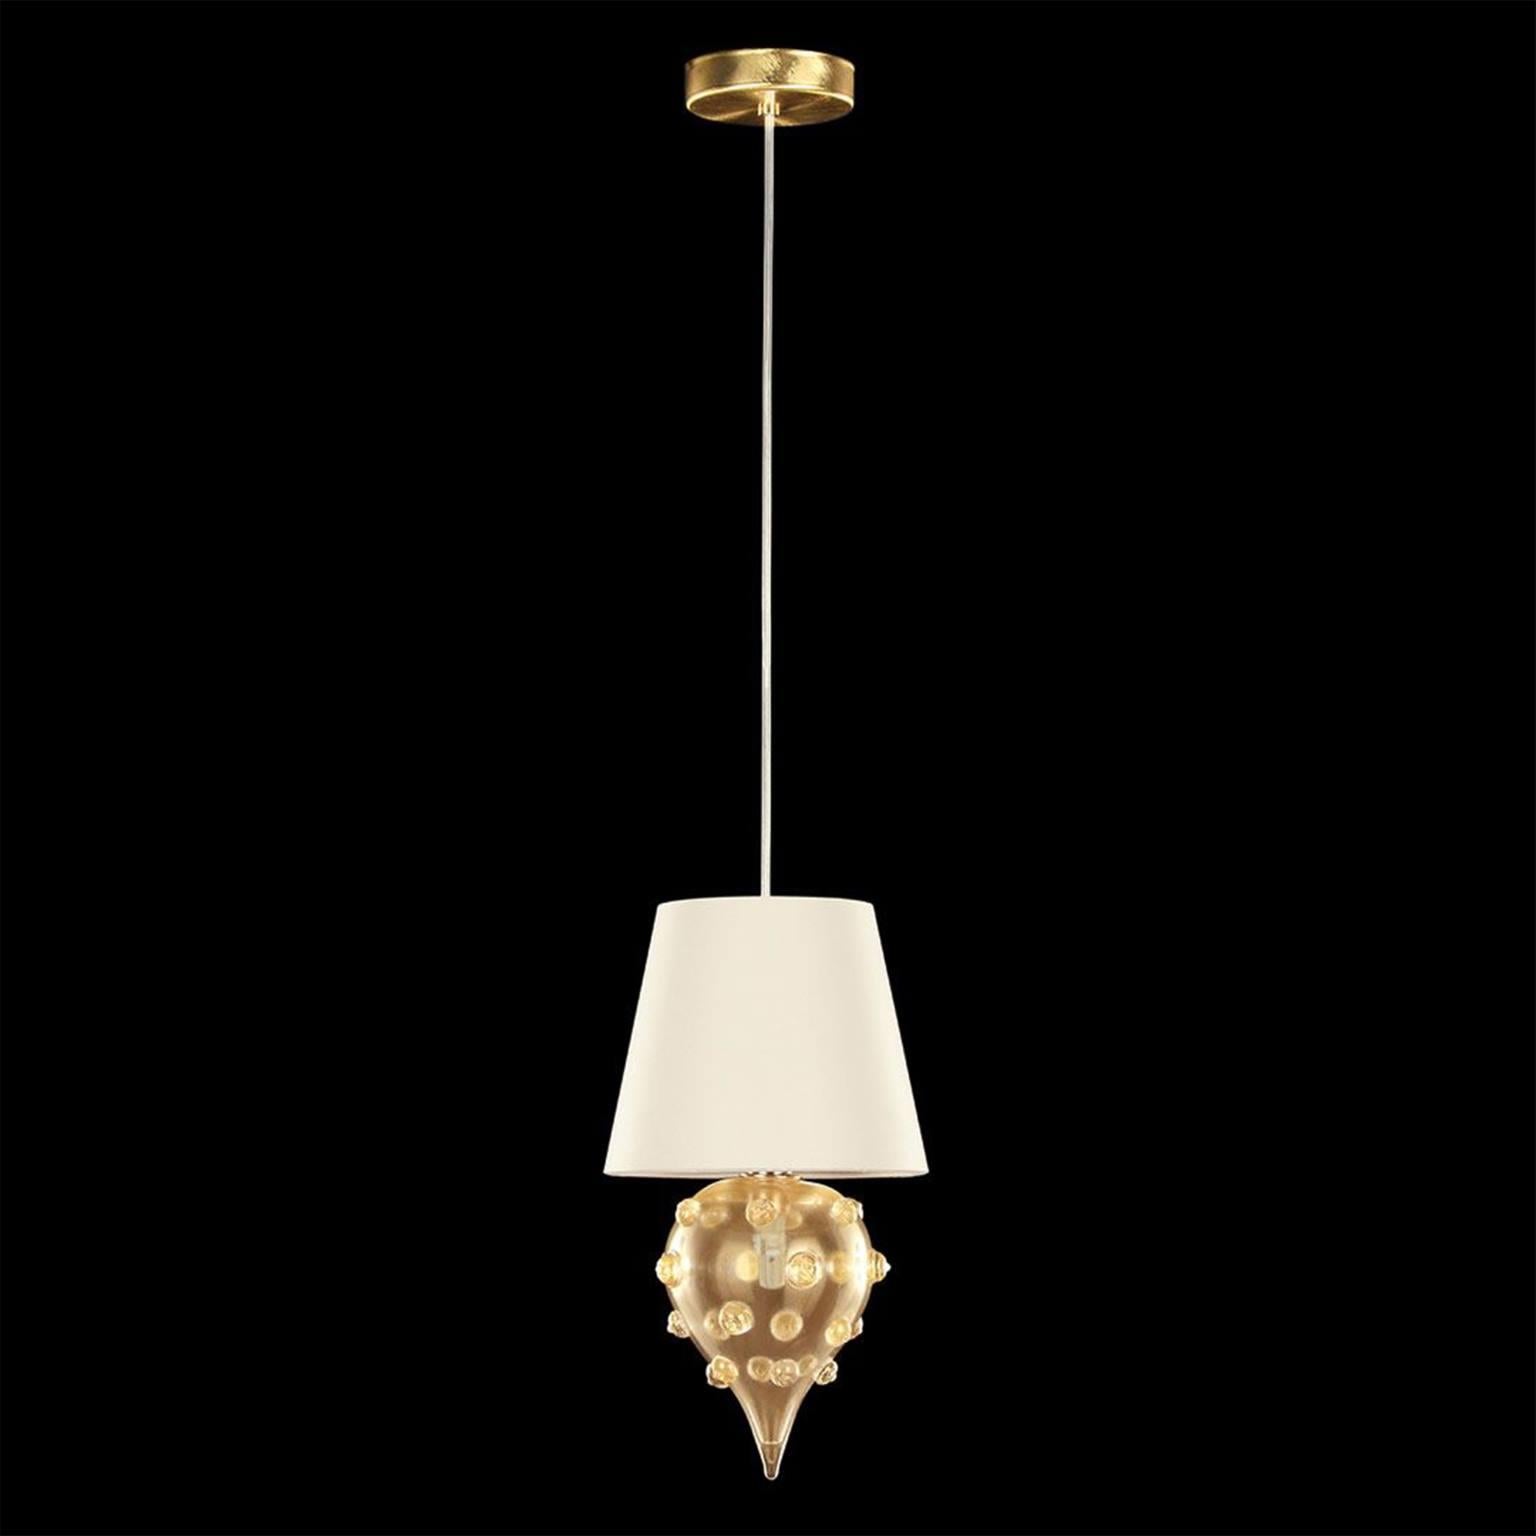 Artistic Suspension 1 light, golden leaf glass, ivory lampshade by Multiforme
Absolute d'acqua suspension lamp with dove grey cotonette lampshade and gold leaf artistic glass elements by Multiforme. Polished gold frame. The artistic glass, design